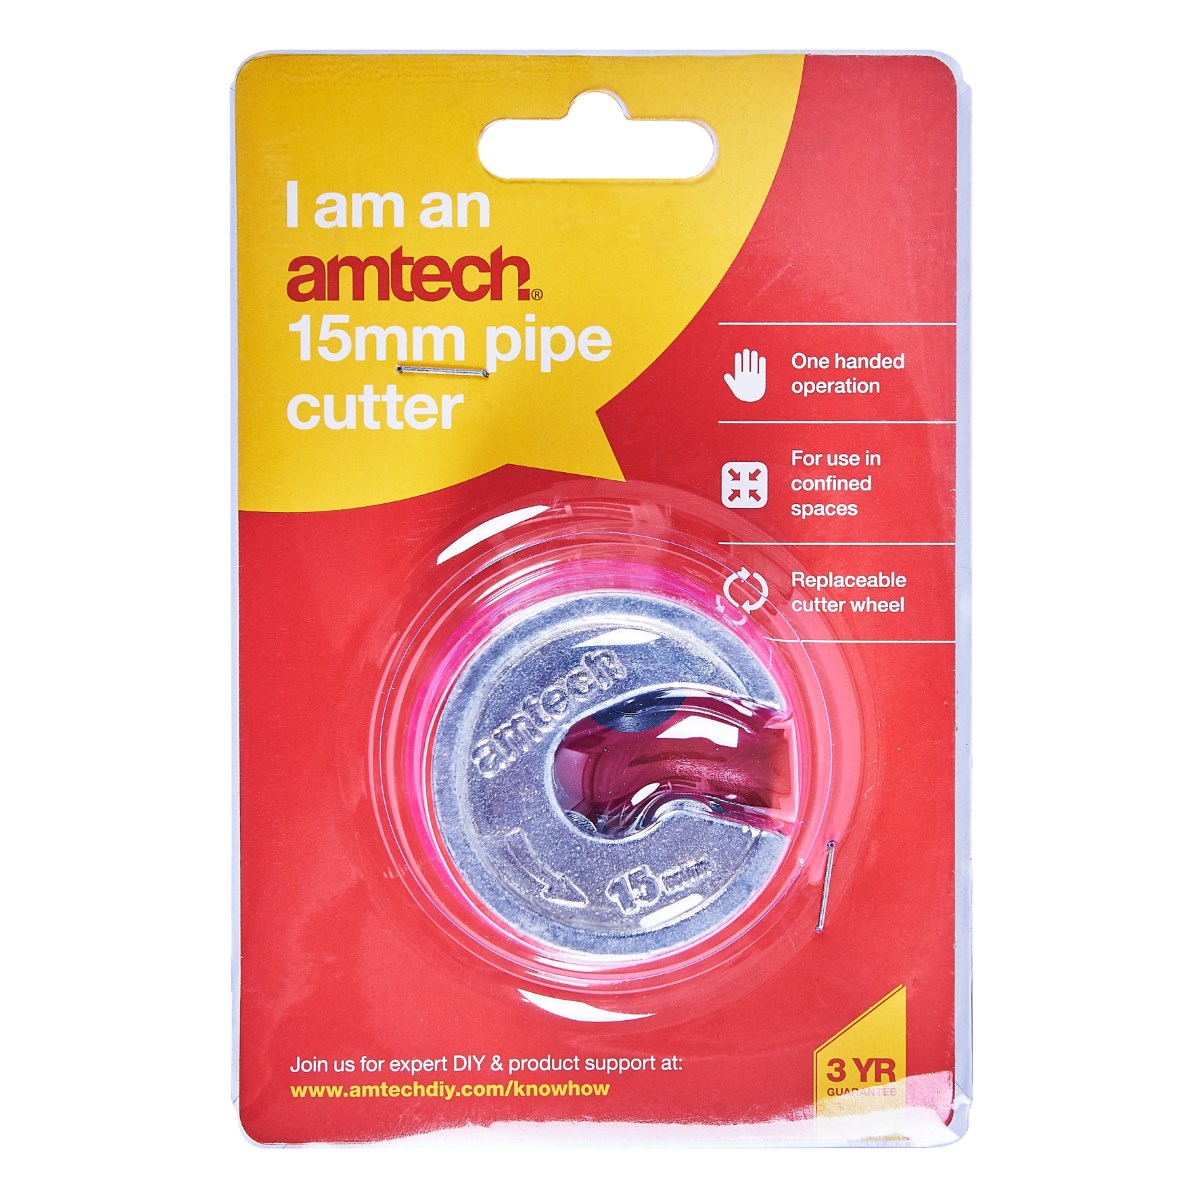 Amtech 15mm Copper Pipe Cutter C0260 for sale online 